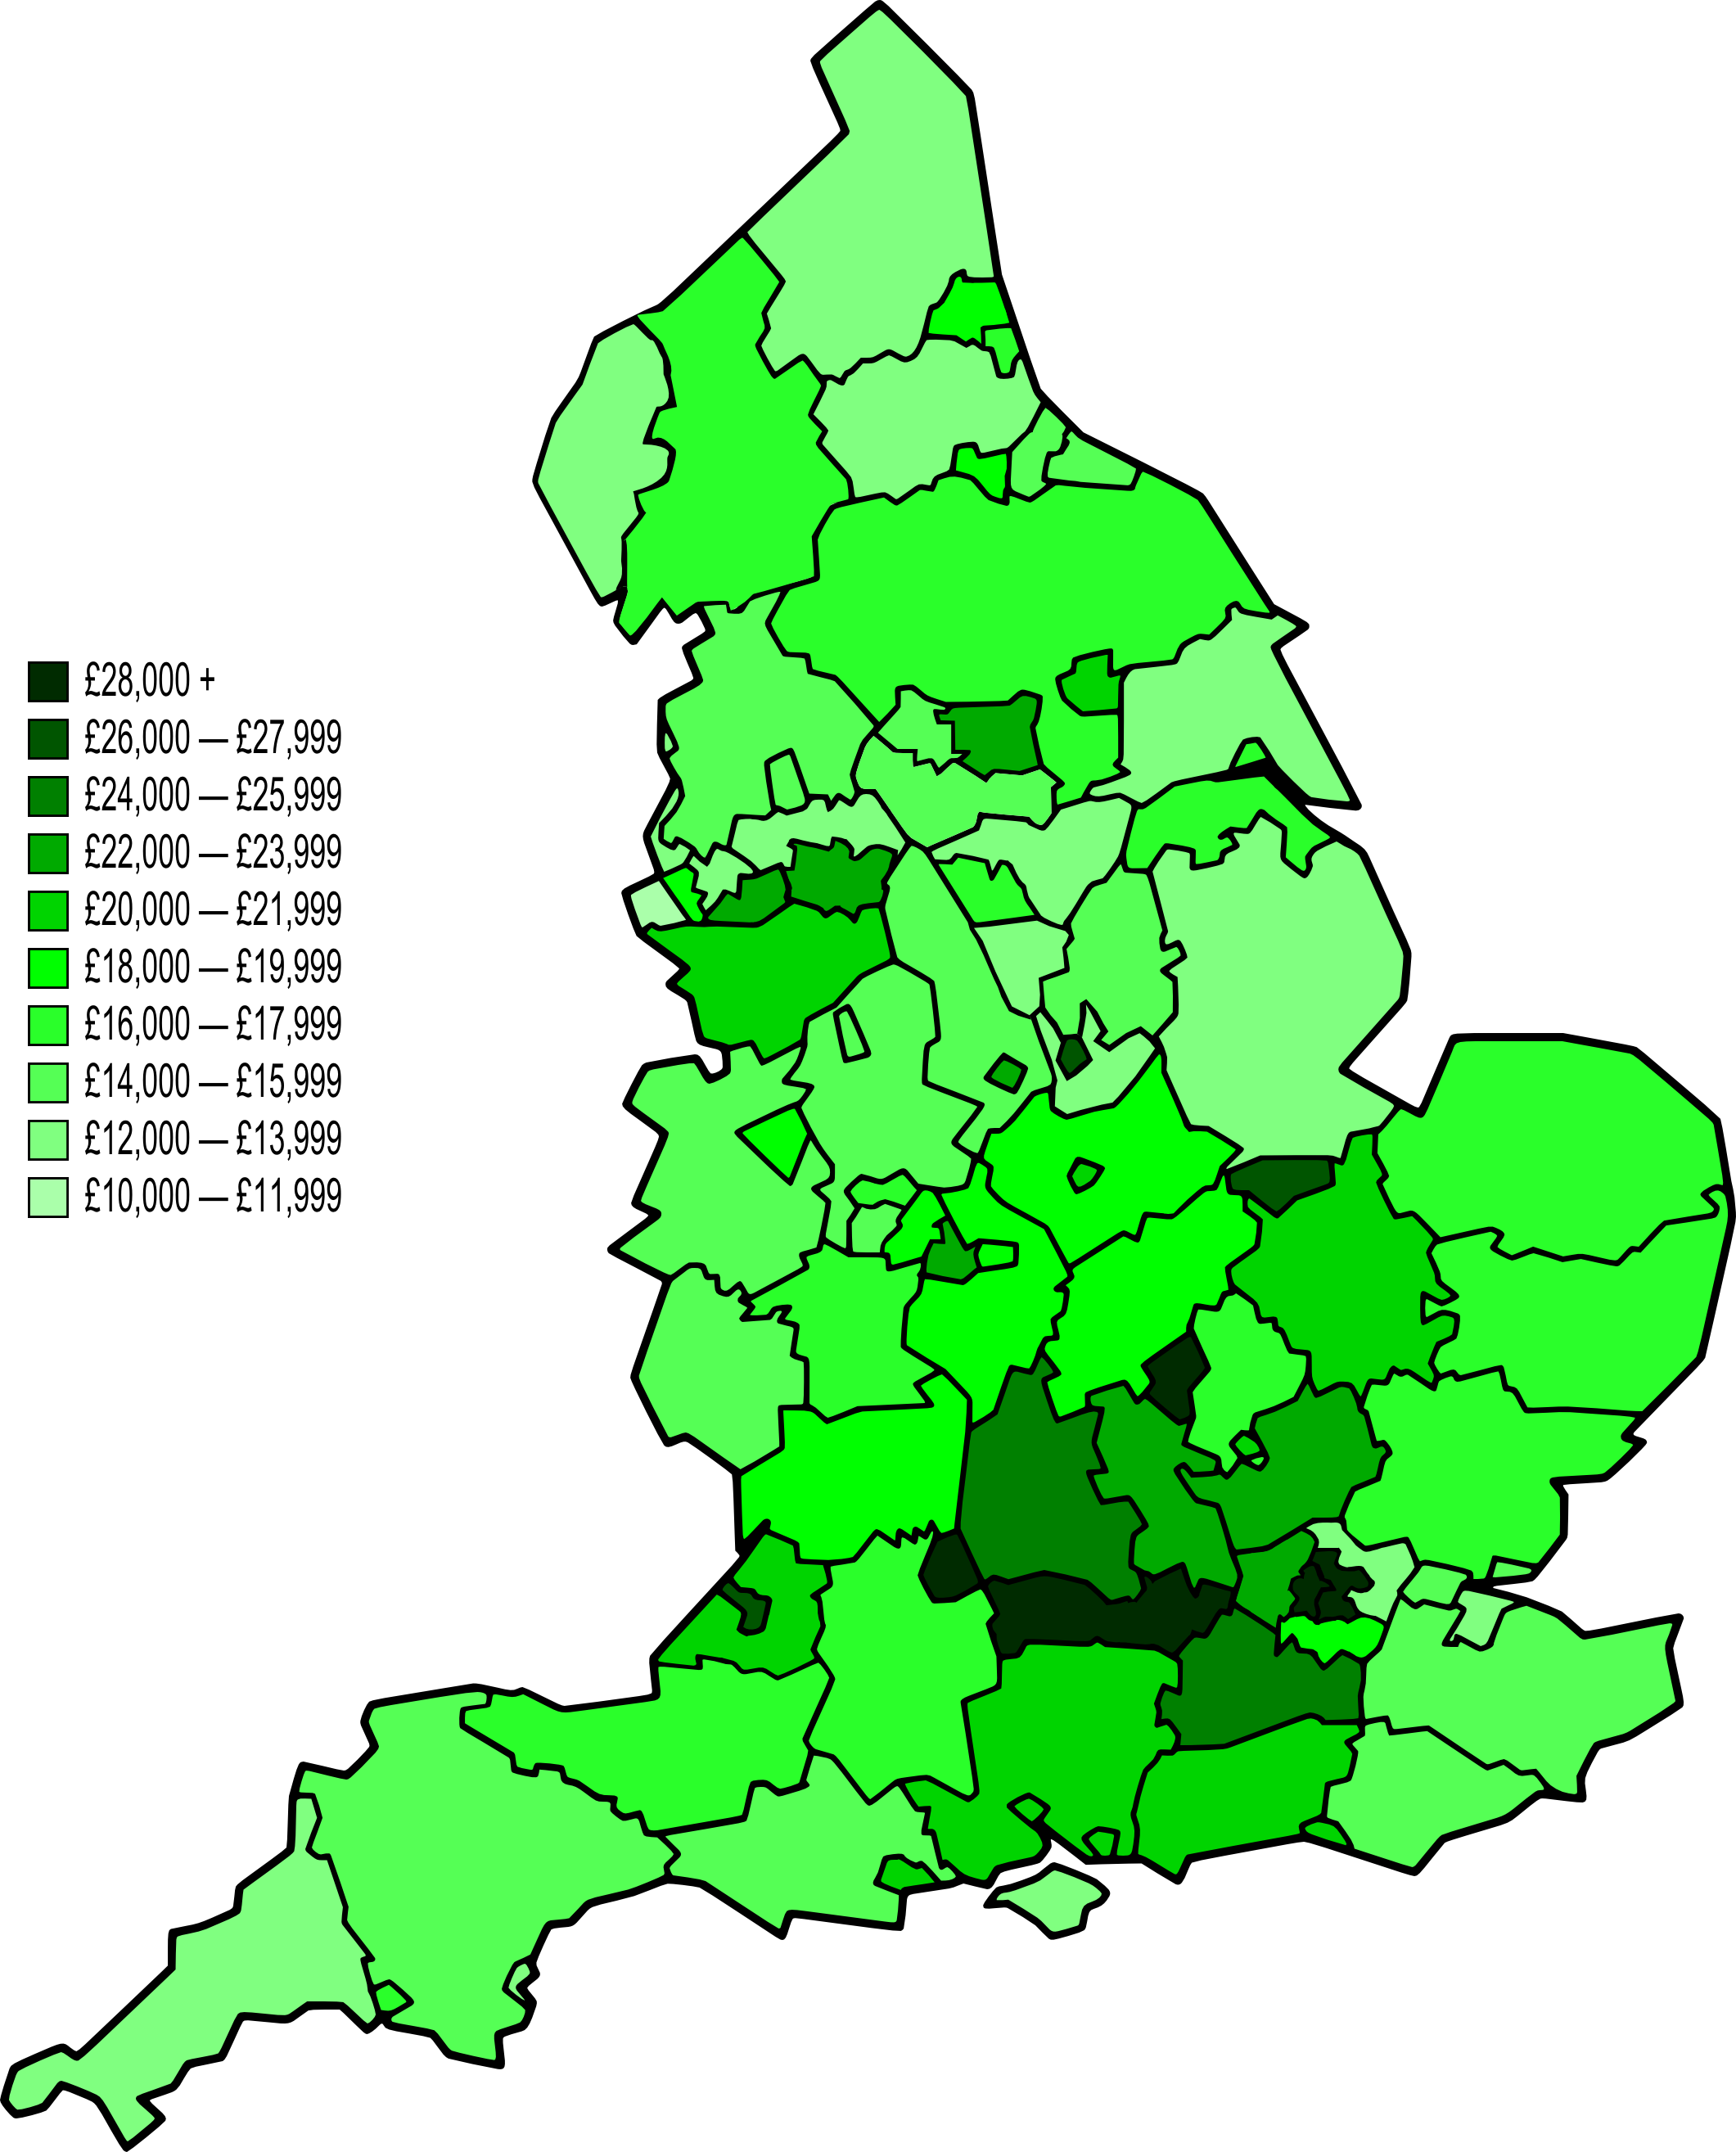 Map_of_NUTS_3_areas_in_England_by_GVA_per_capita_(2007).png